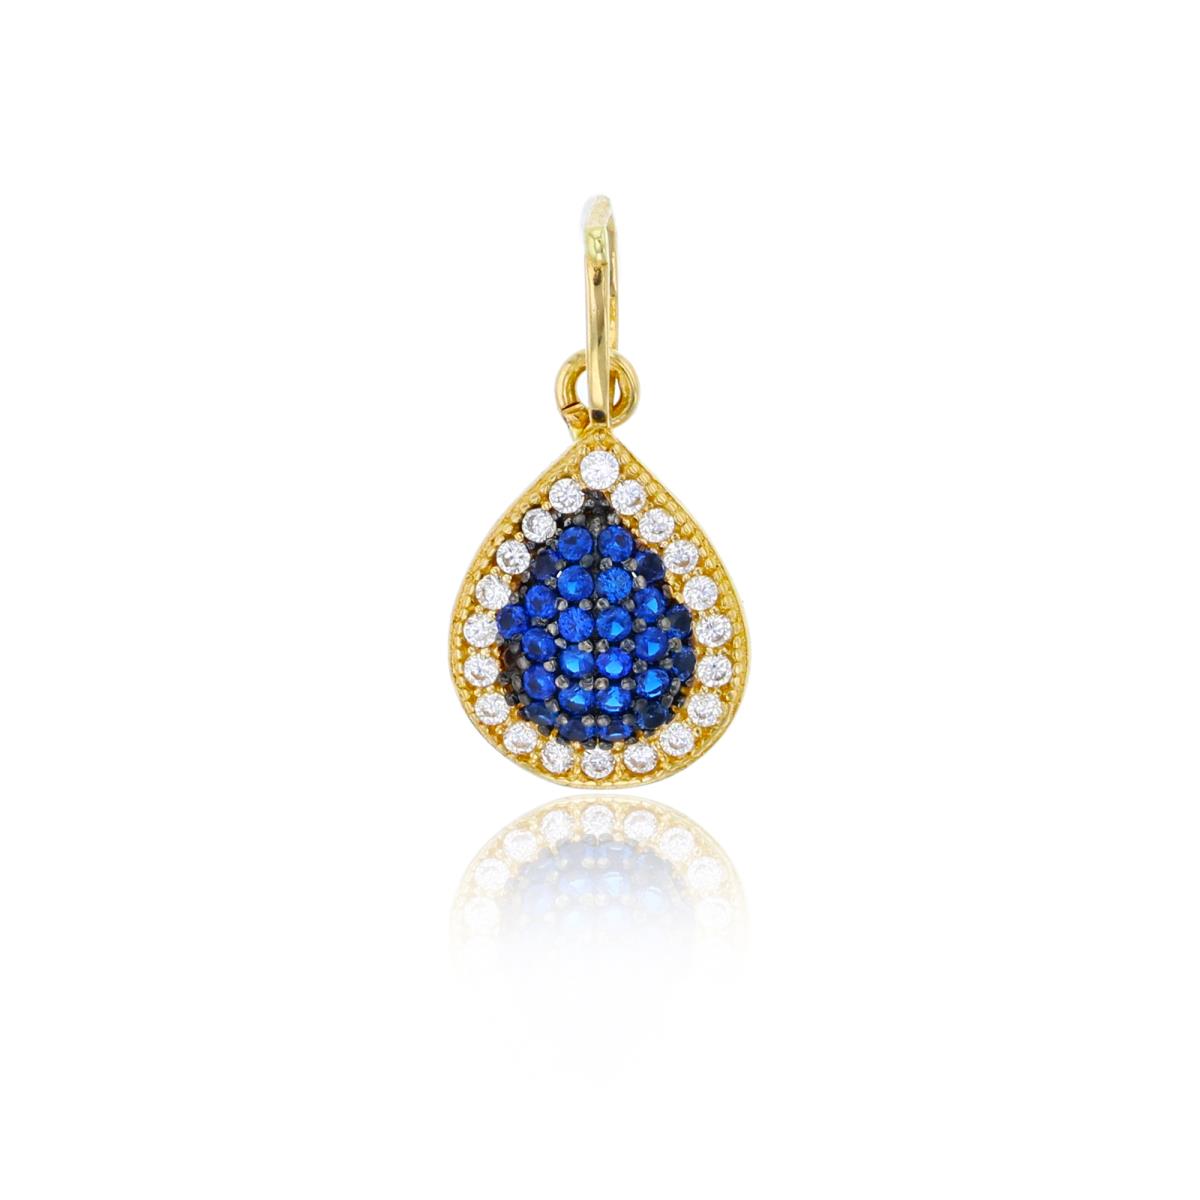 10K Yellow Gold 17x9mm Micropave Sapphire & White CZ Domed Pear-Shaped Pendant